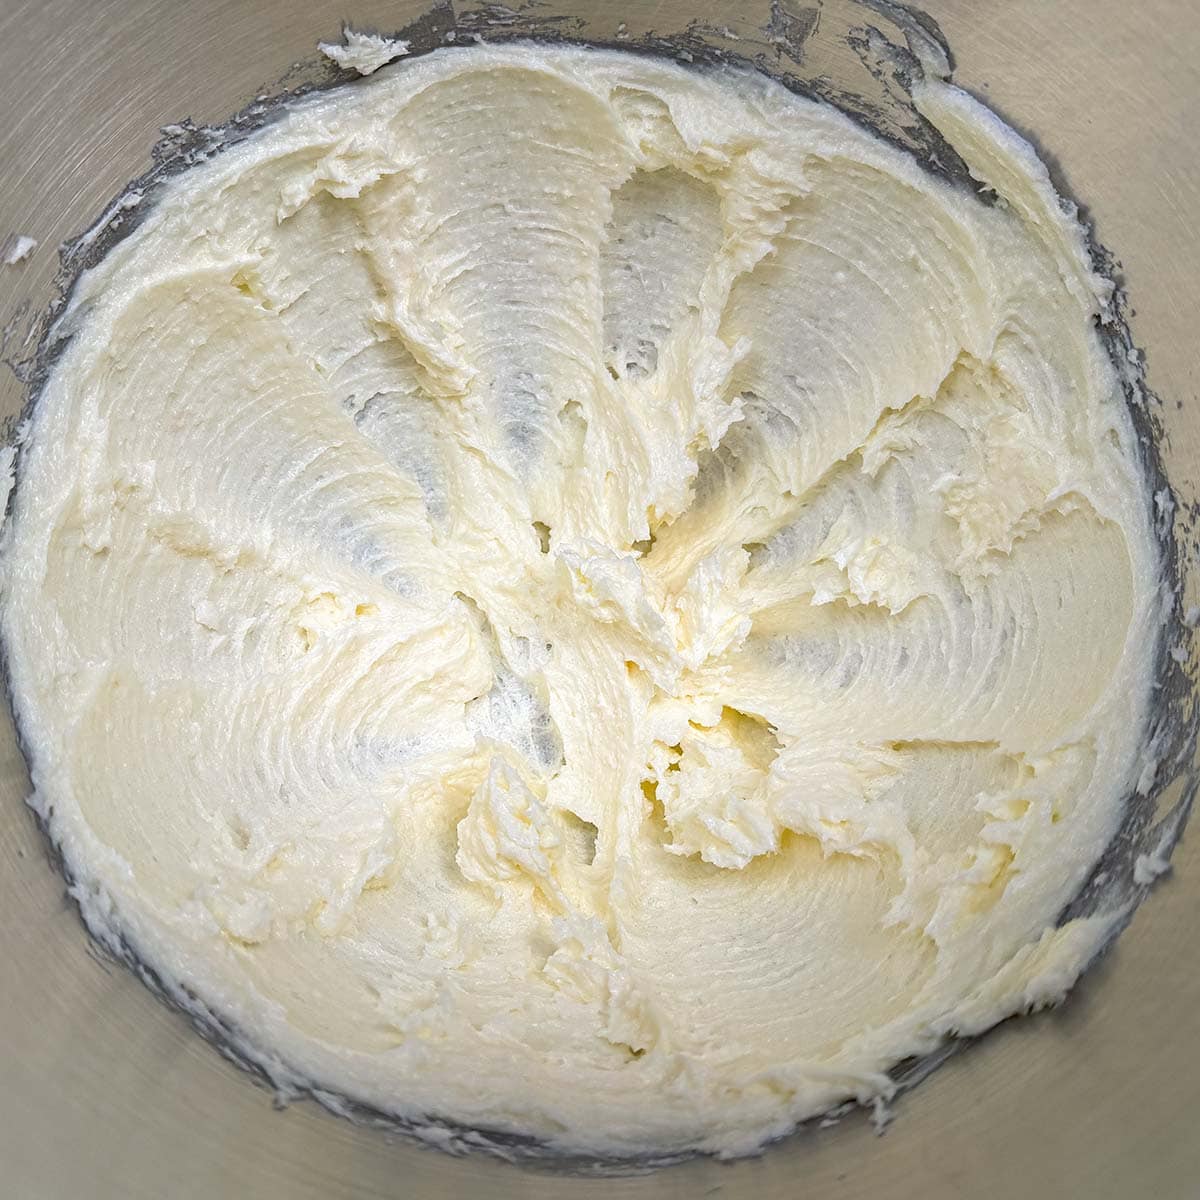 Adding the sugar to the creamed butter and mix.